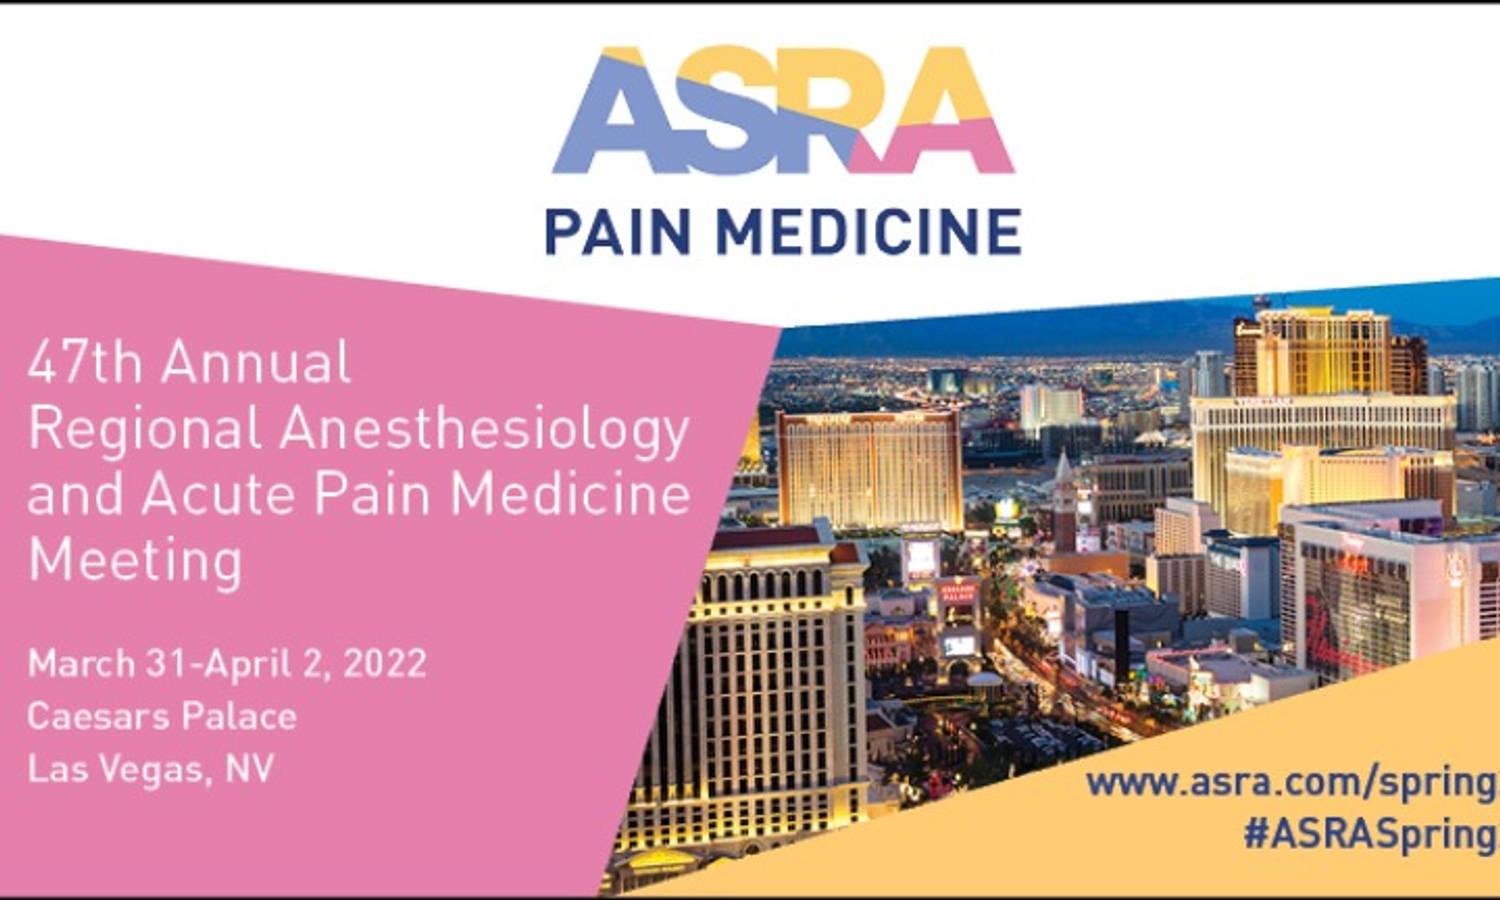 47th Annual Regional Anesthesiology and Acute Pain Medicine Meeting